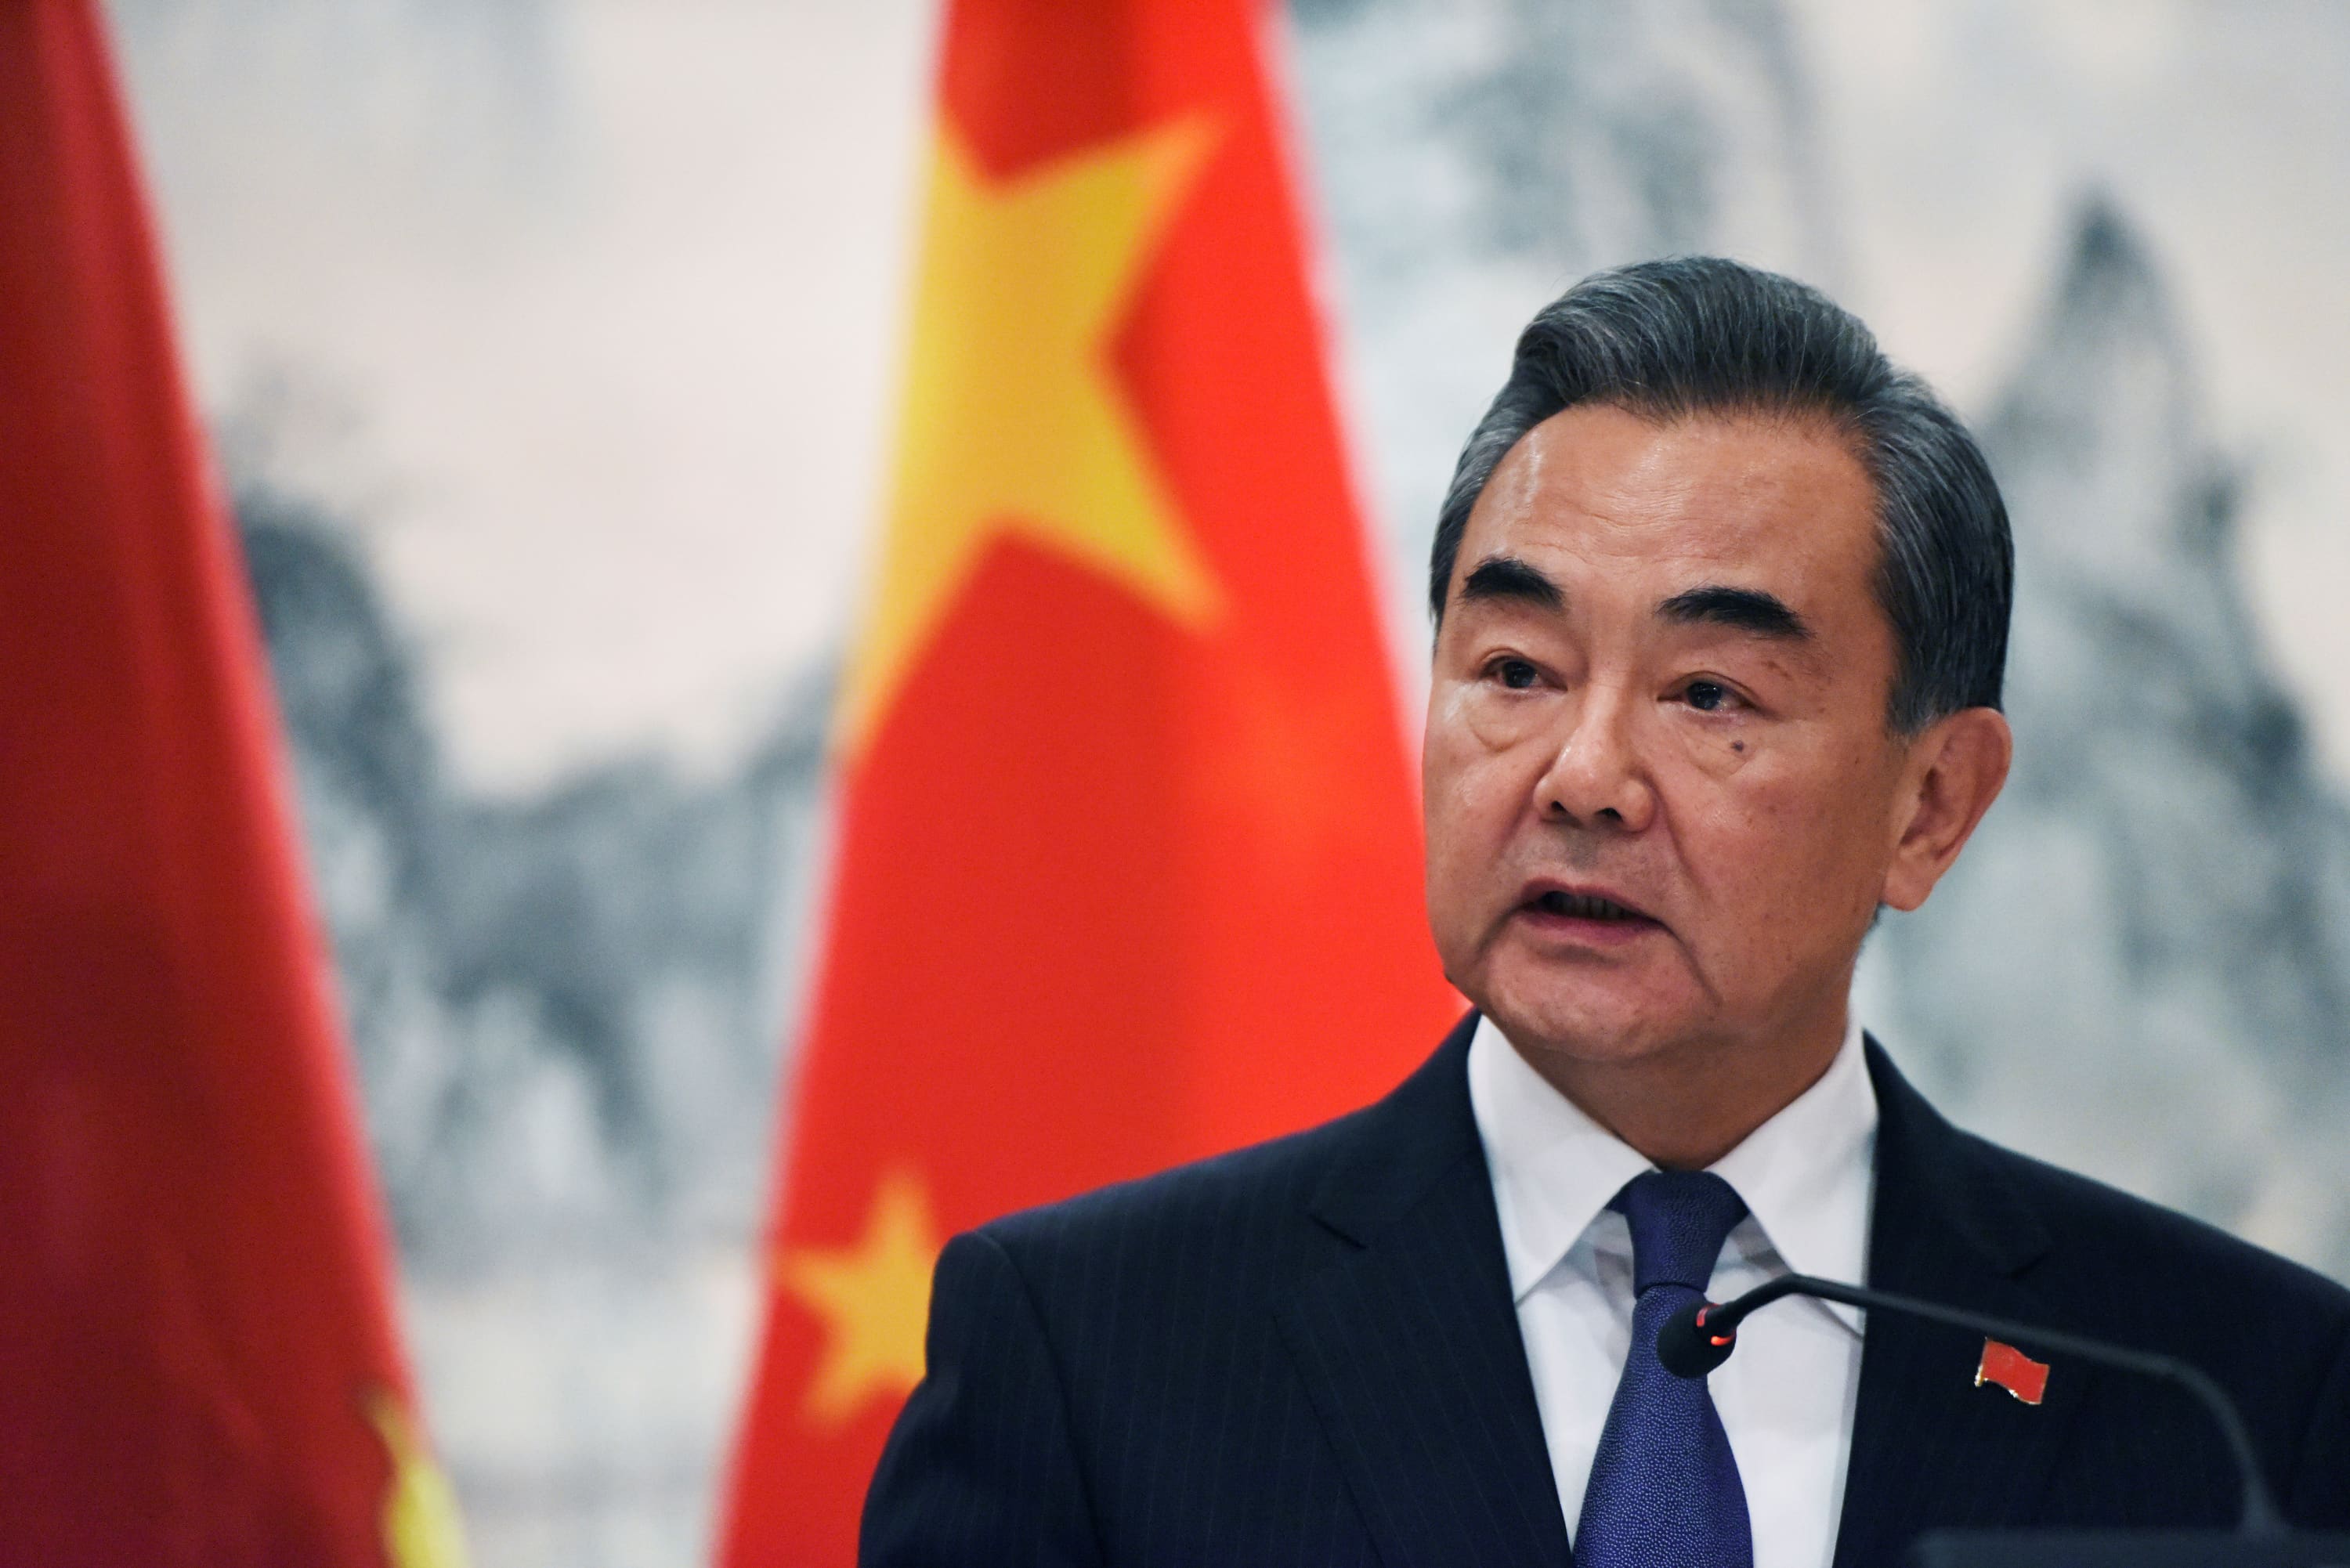 China’s foreign minister calls on US to remove tariff sanctions